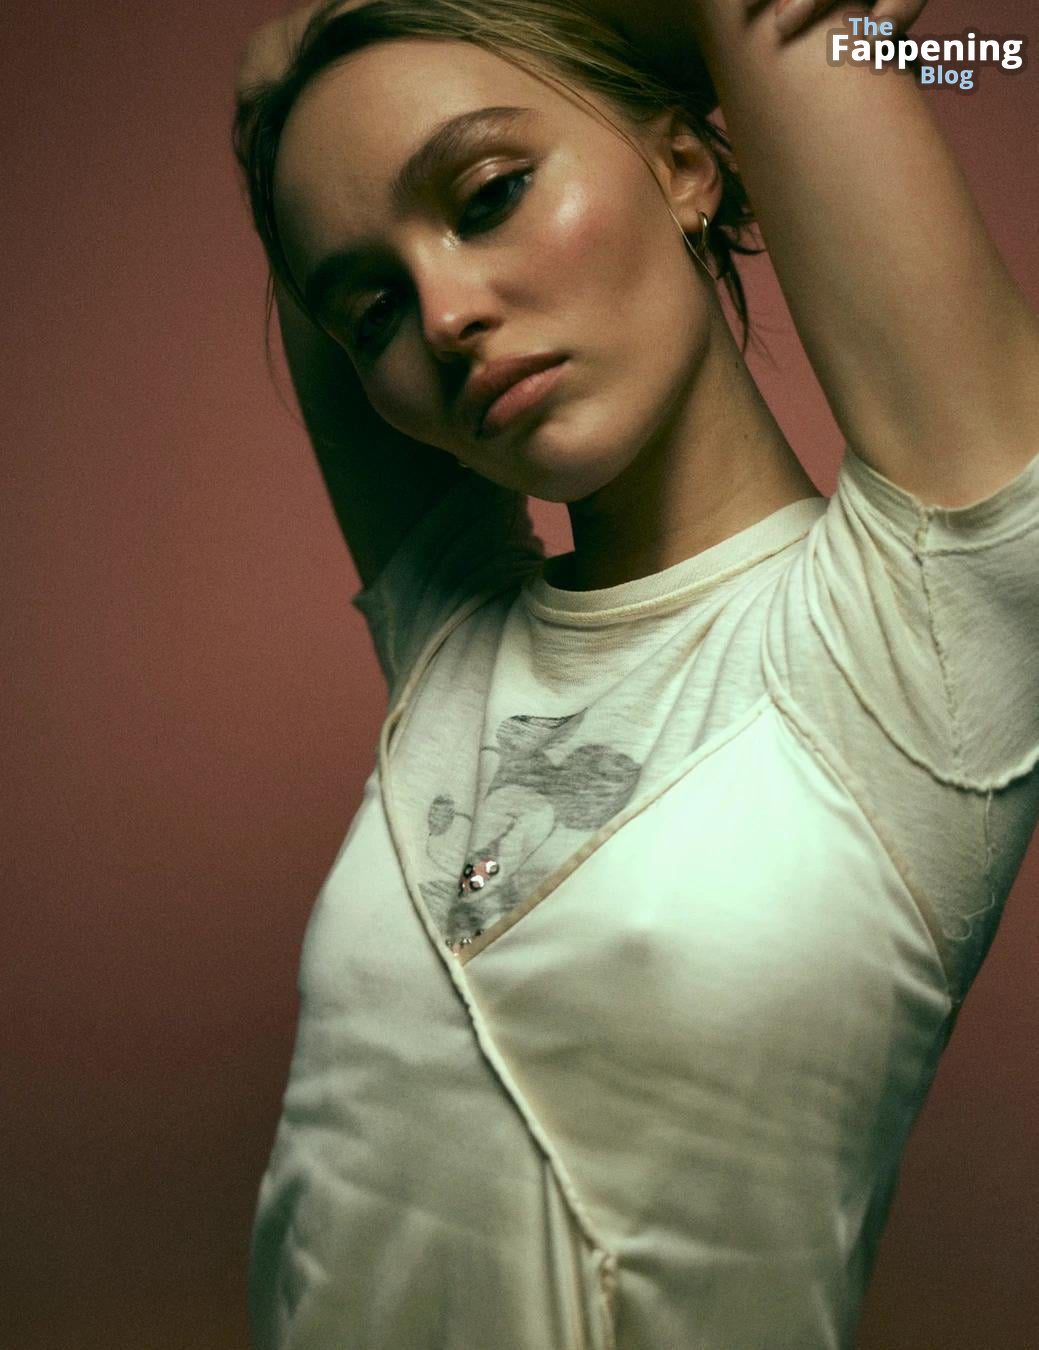 Lily-Rose-Depp-Nude-Sexy-i-D-Magazine-The-Fappening-Blog-6.jpg